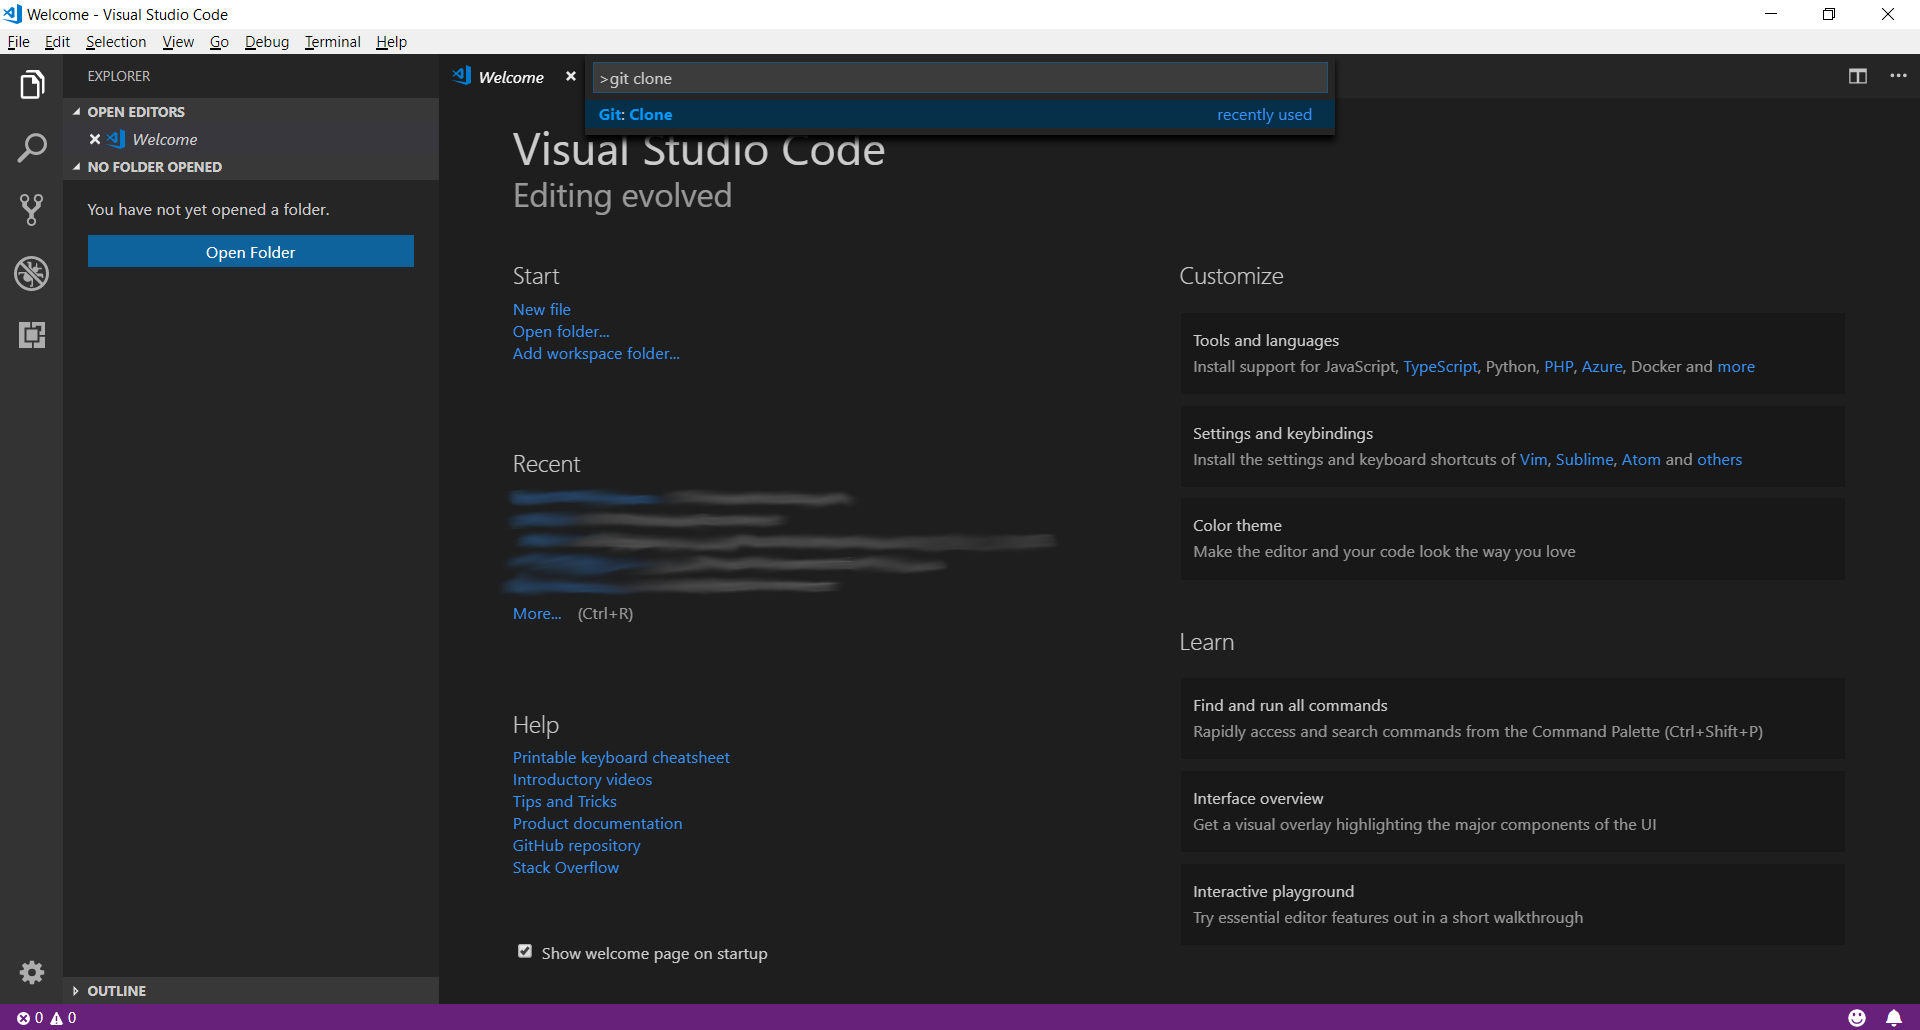 vscode-2018-08-clone1.png